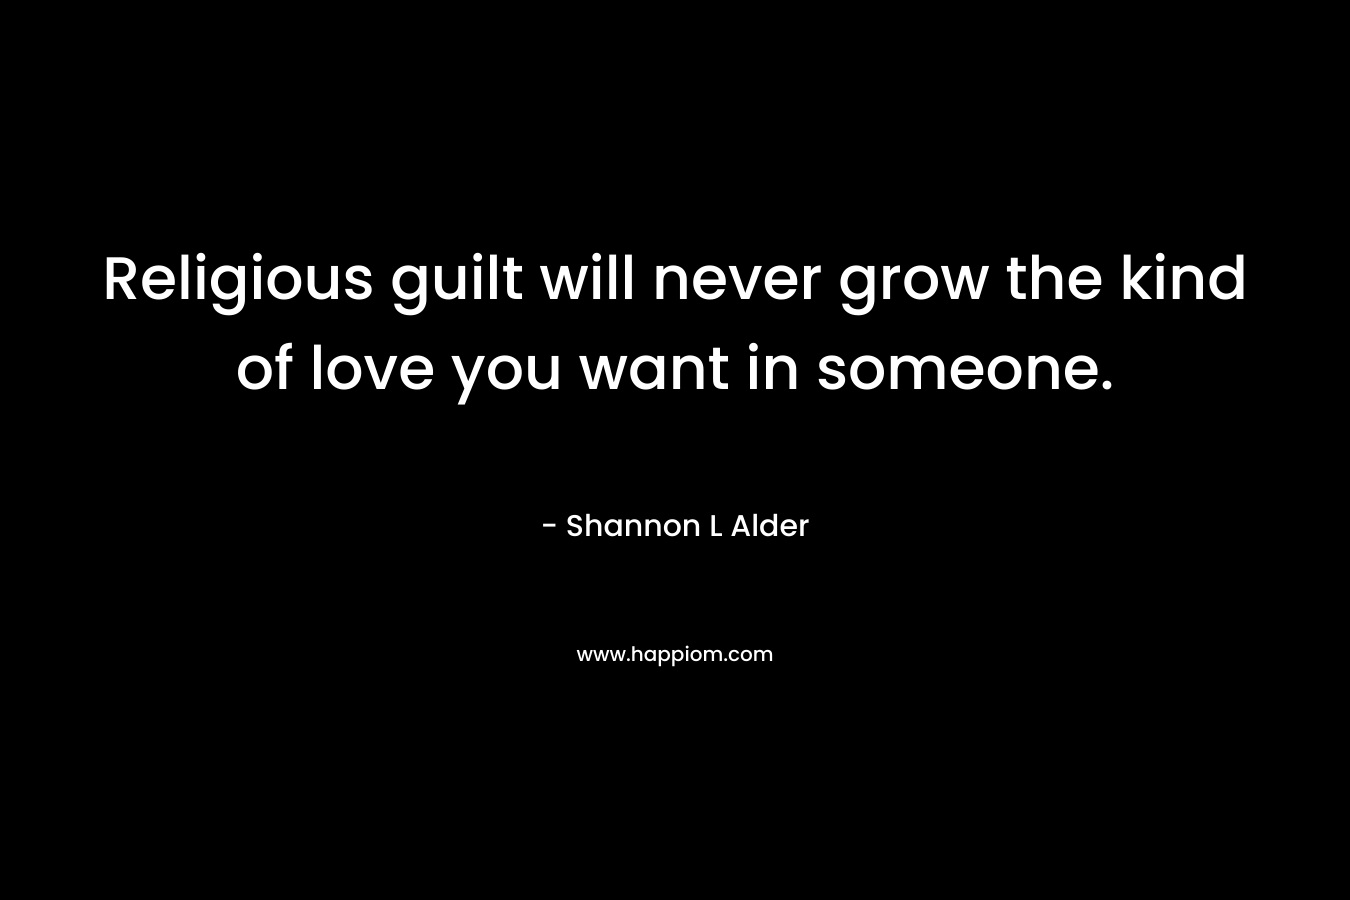 Religious guilt will never grow the kind of love you want in someone.